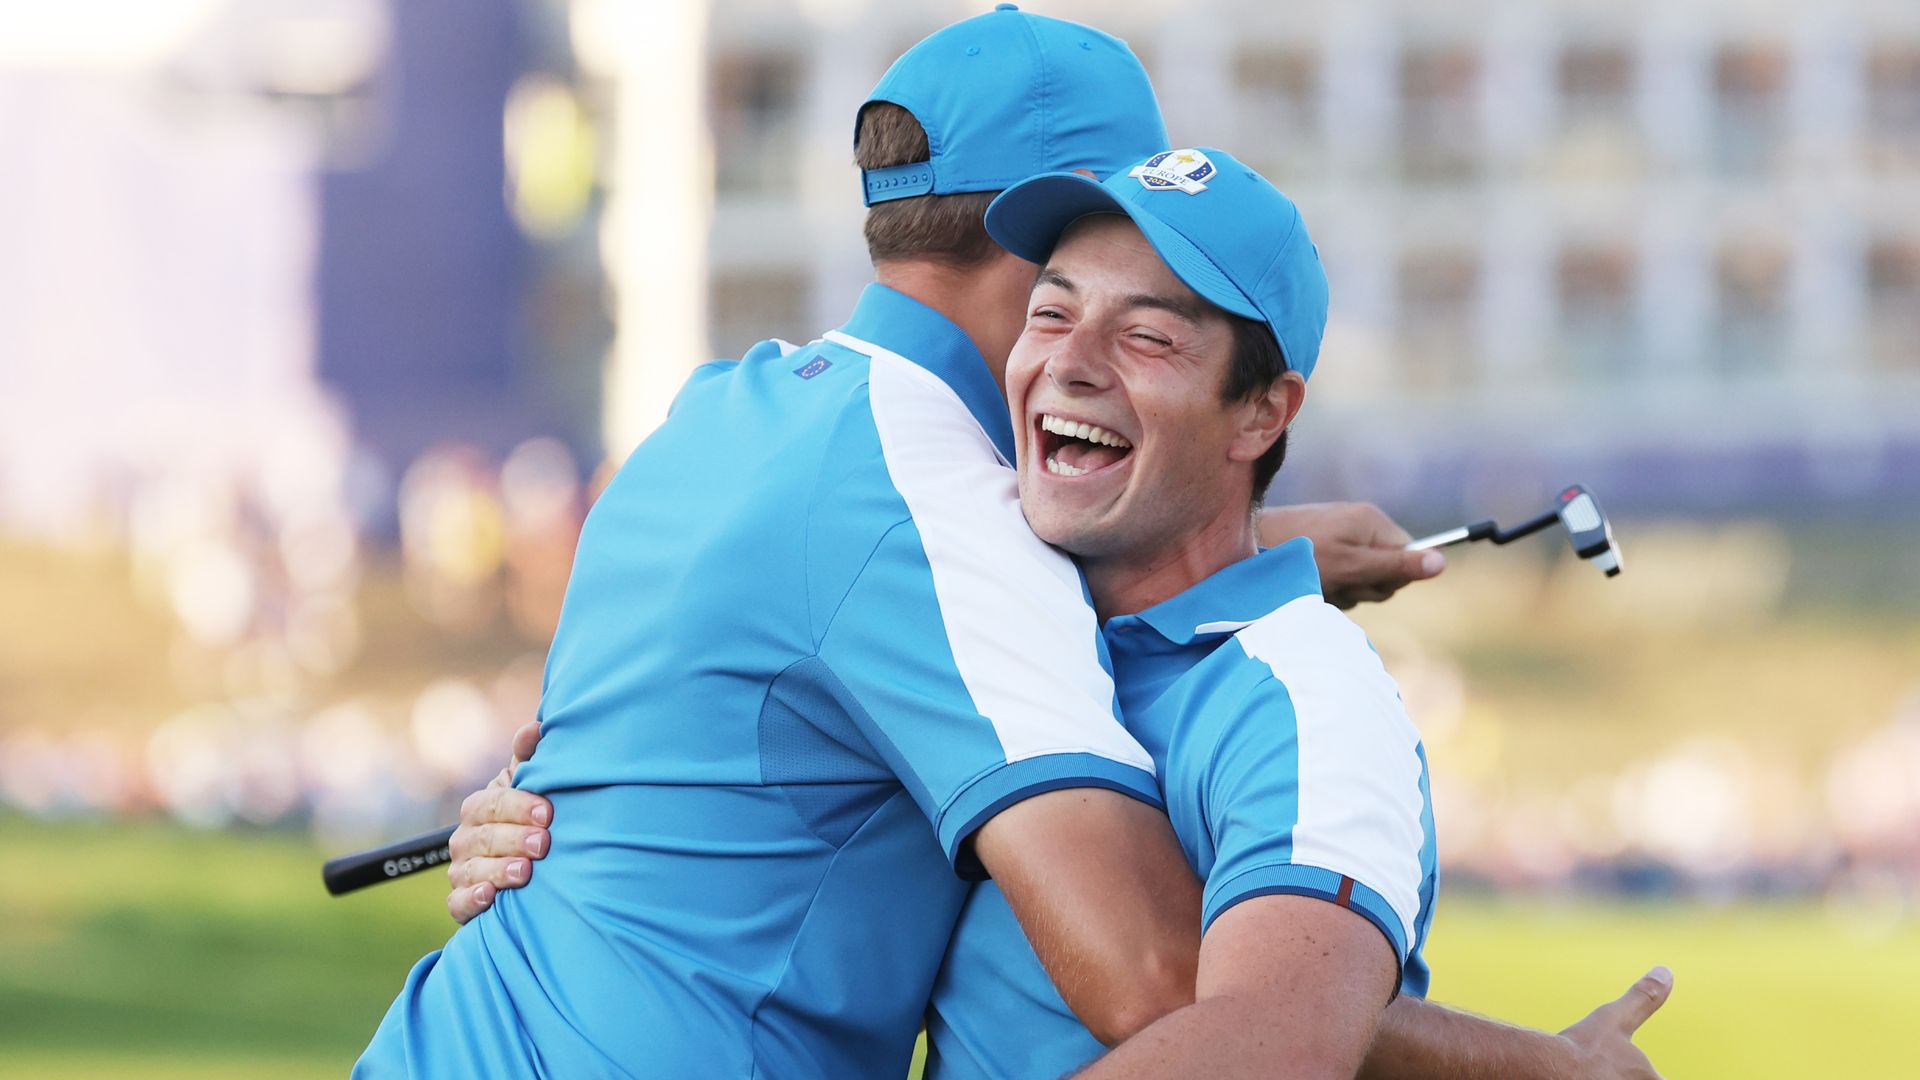 Europe surge ahead in Ryder Cup after sweeping foursomes